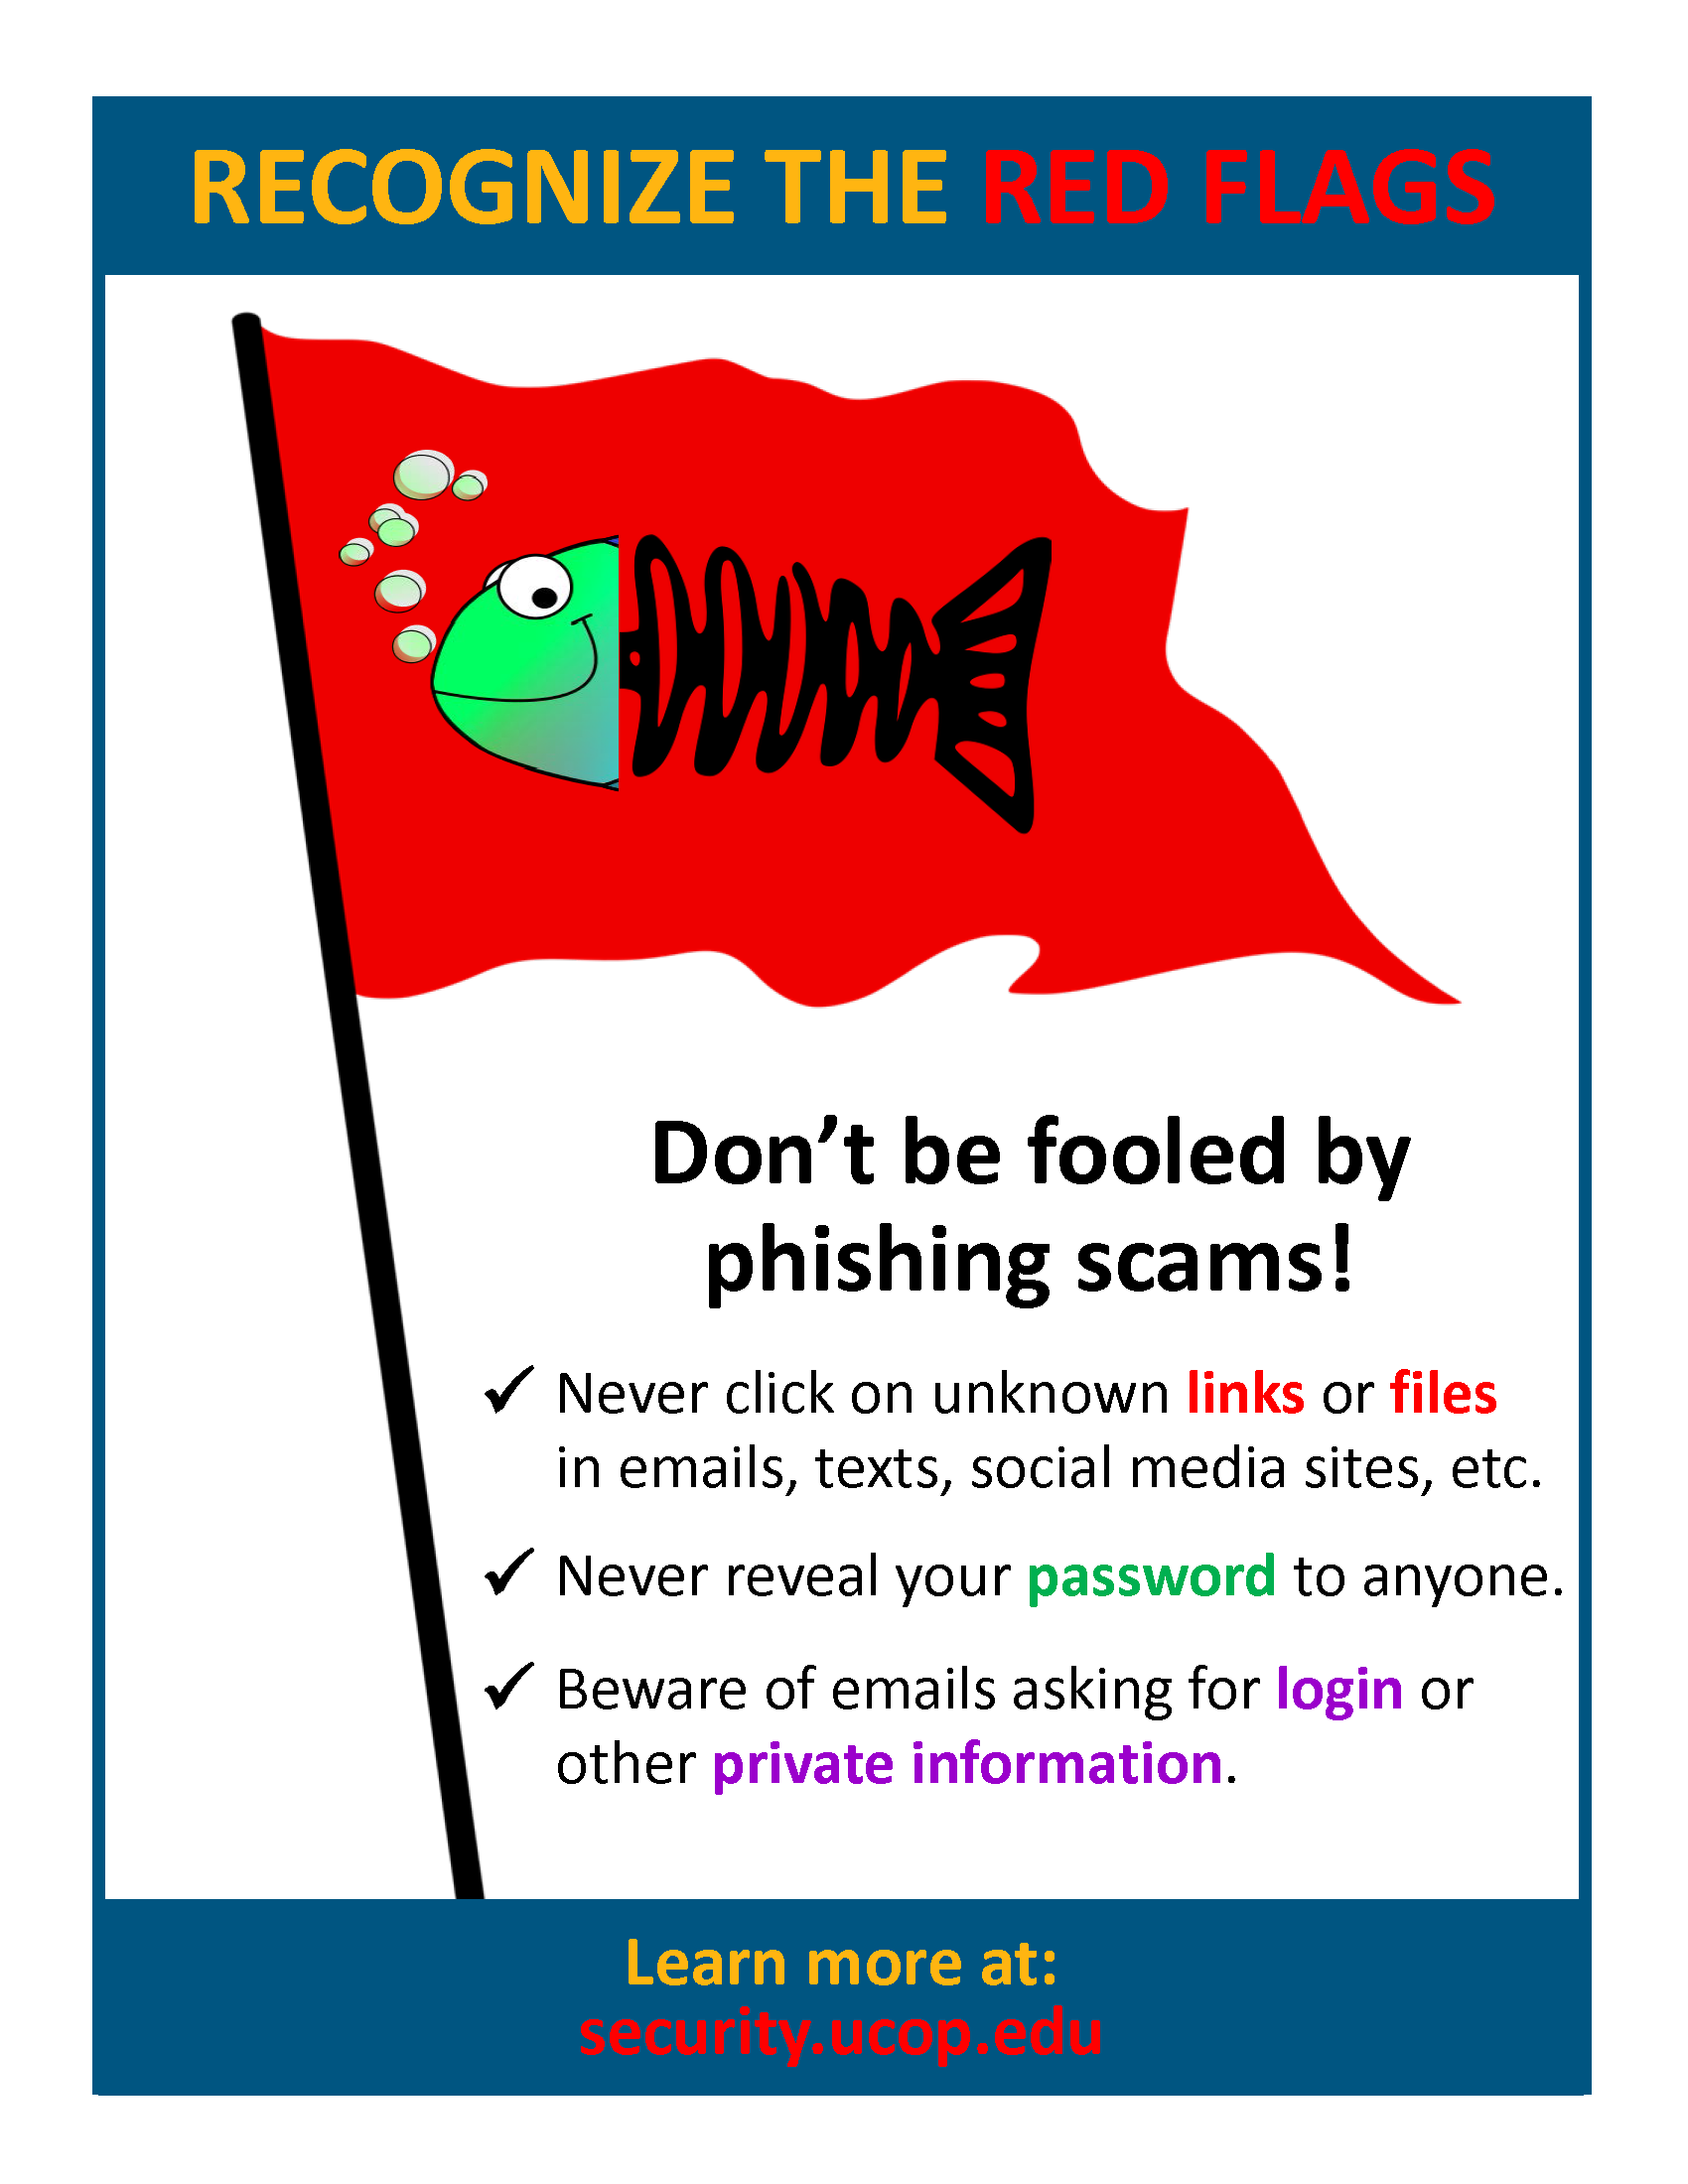 Flyer: Recognize the red flags. Don't be fooled by phishing scams.